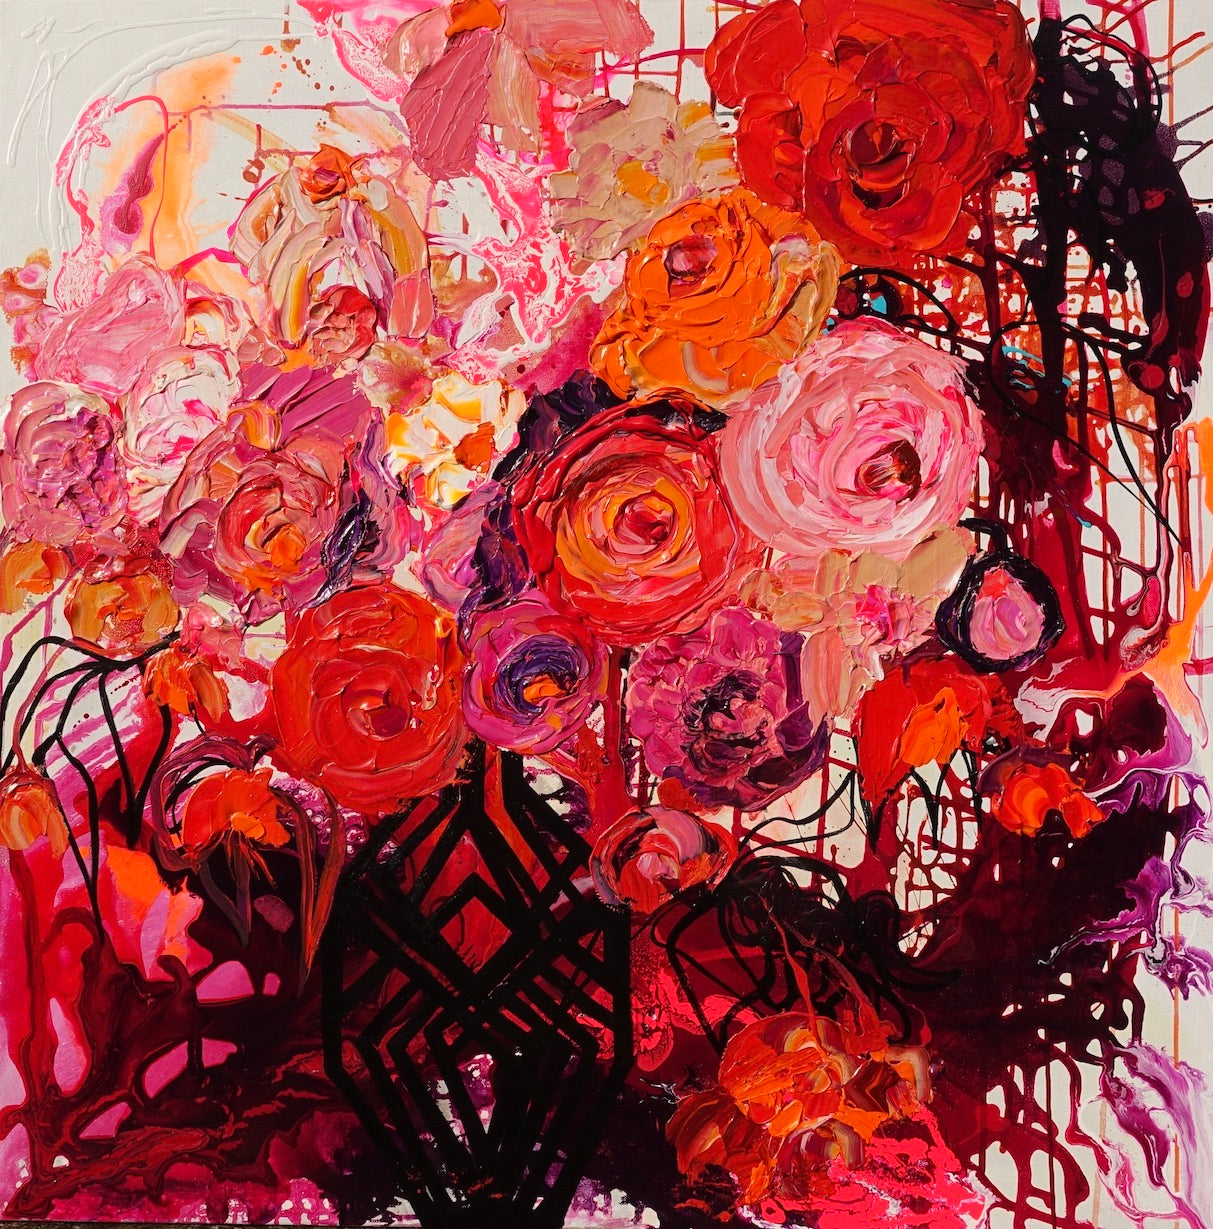 Buds & Blooms is a mass of red, orange and pink flowers in a black lacy vase, 100cm x 100cm Acrylic on Canvas.